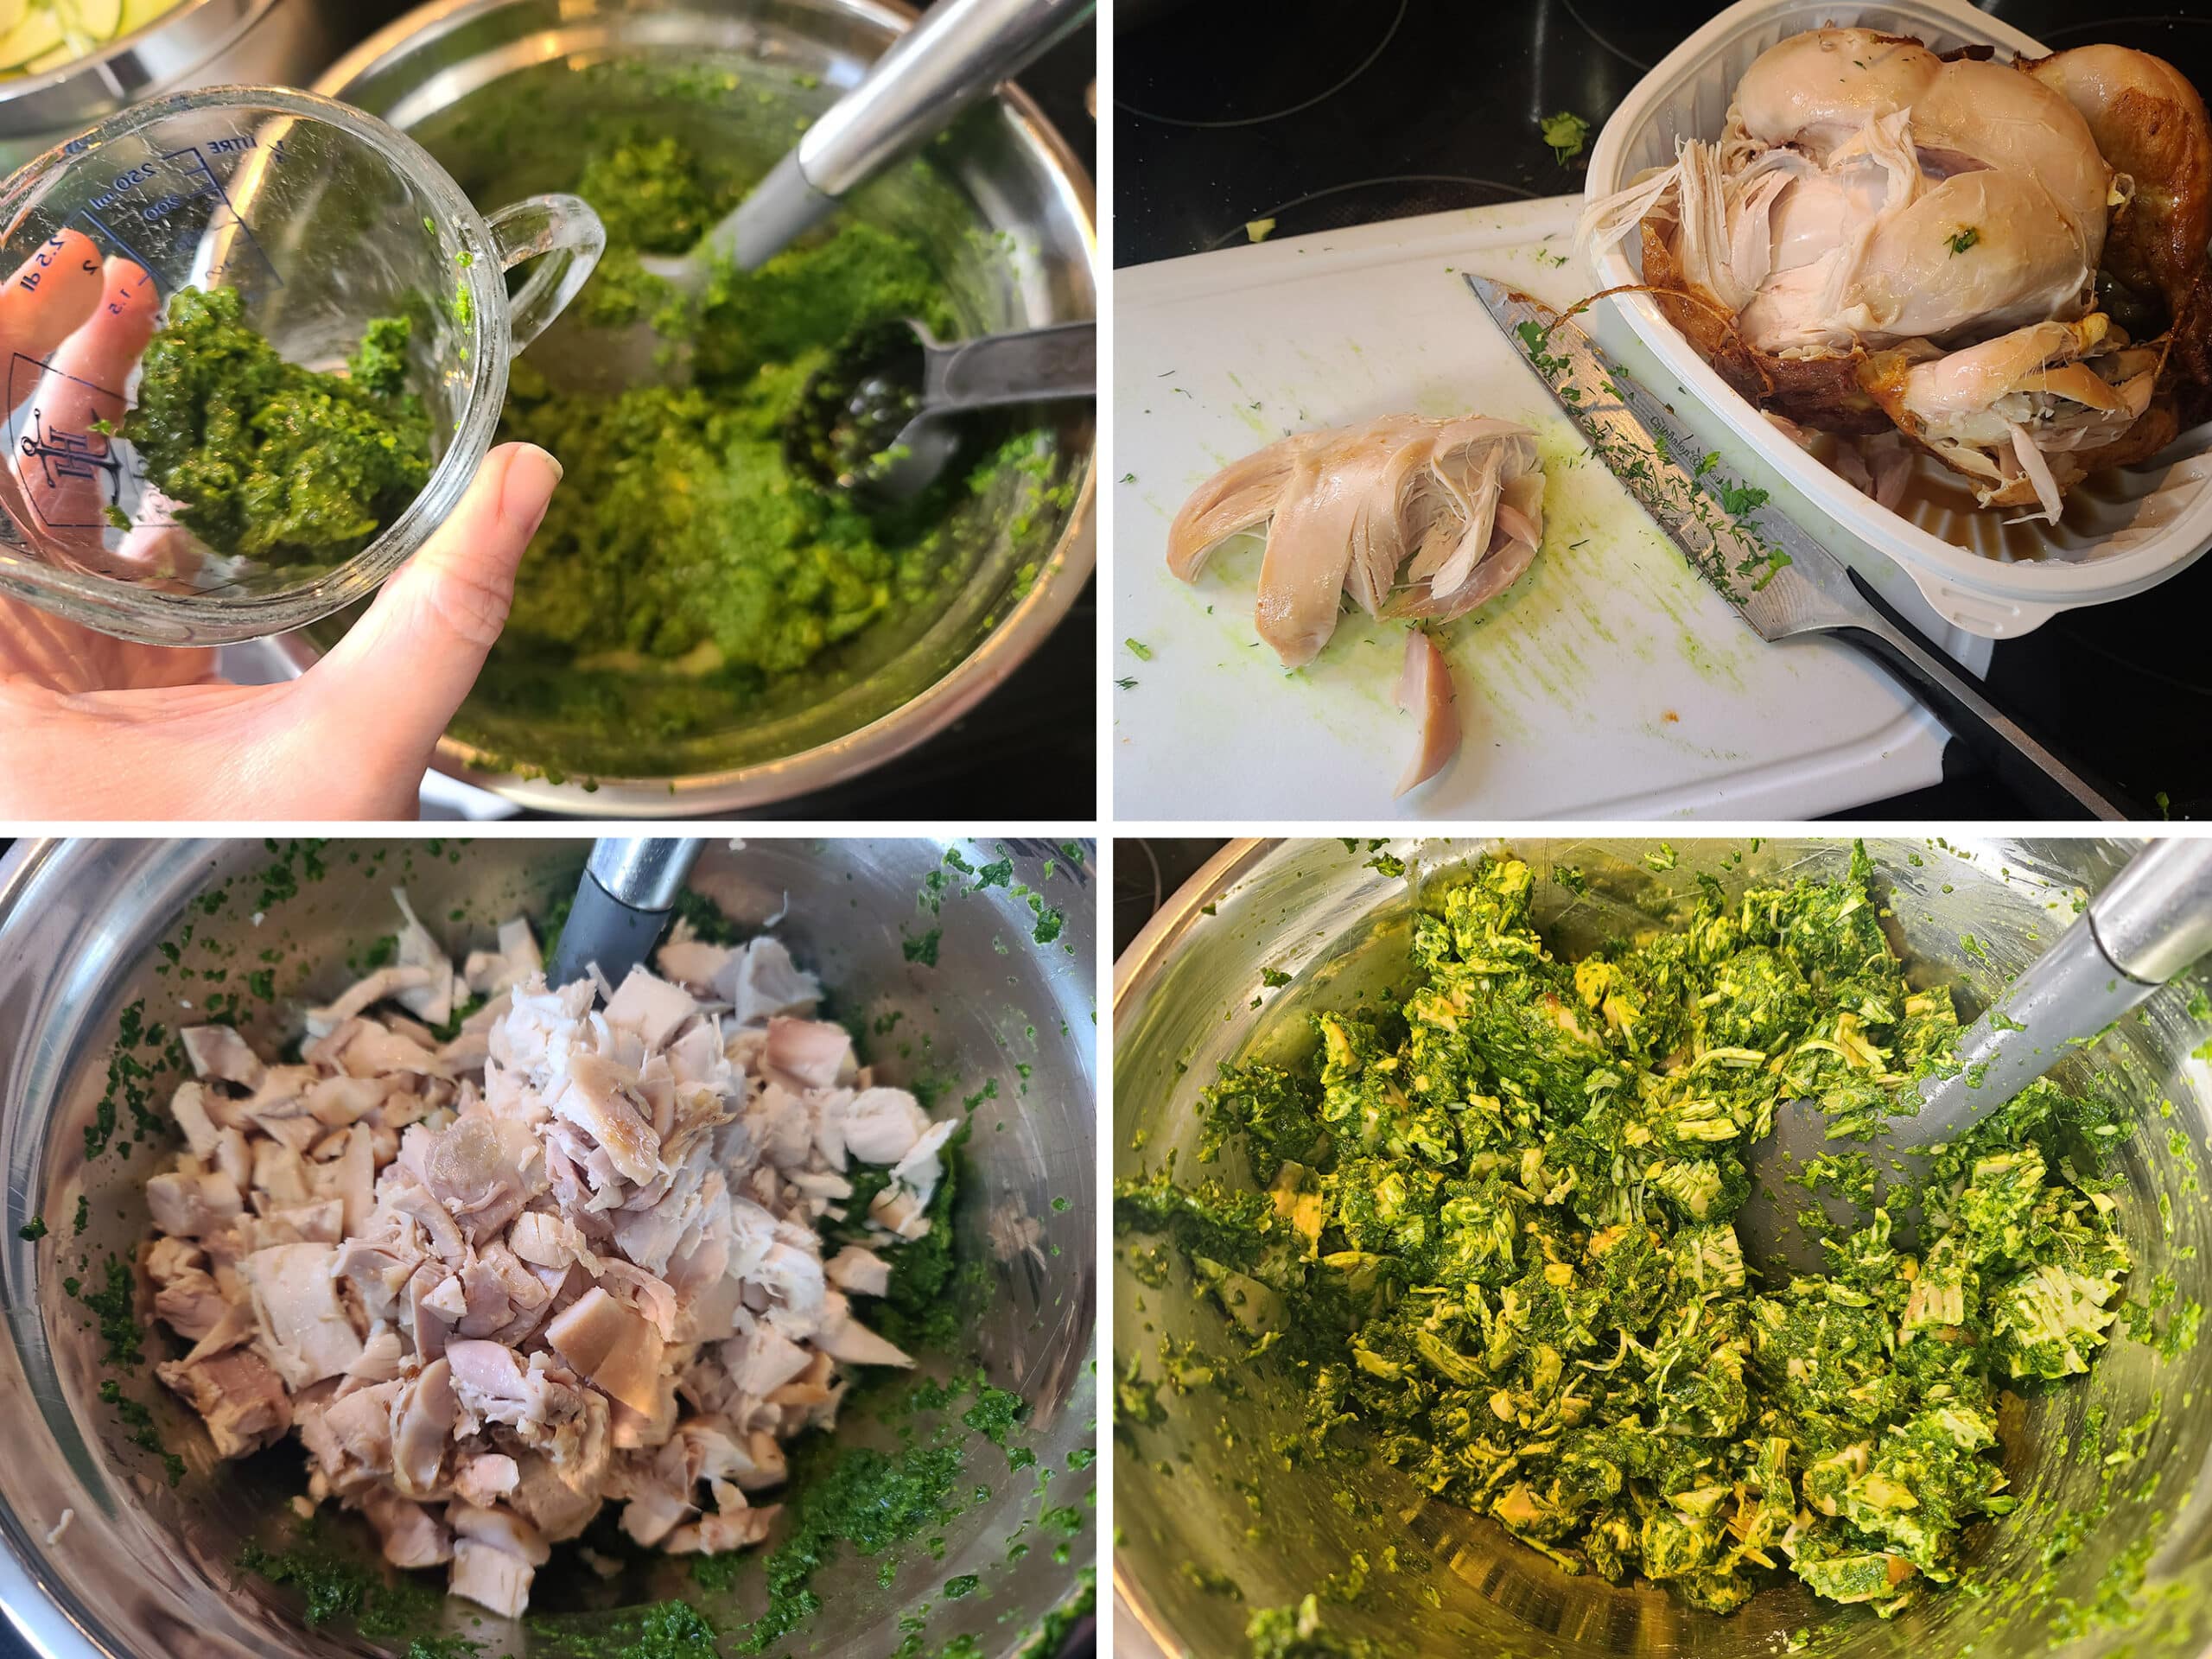 A 4 part image showing part of the spinach mixture being removed, a chicken being cut up, and the bulk of the spinach pesto being mixed with the chopped chicken.